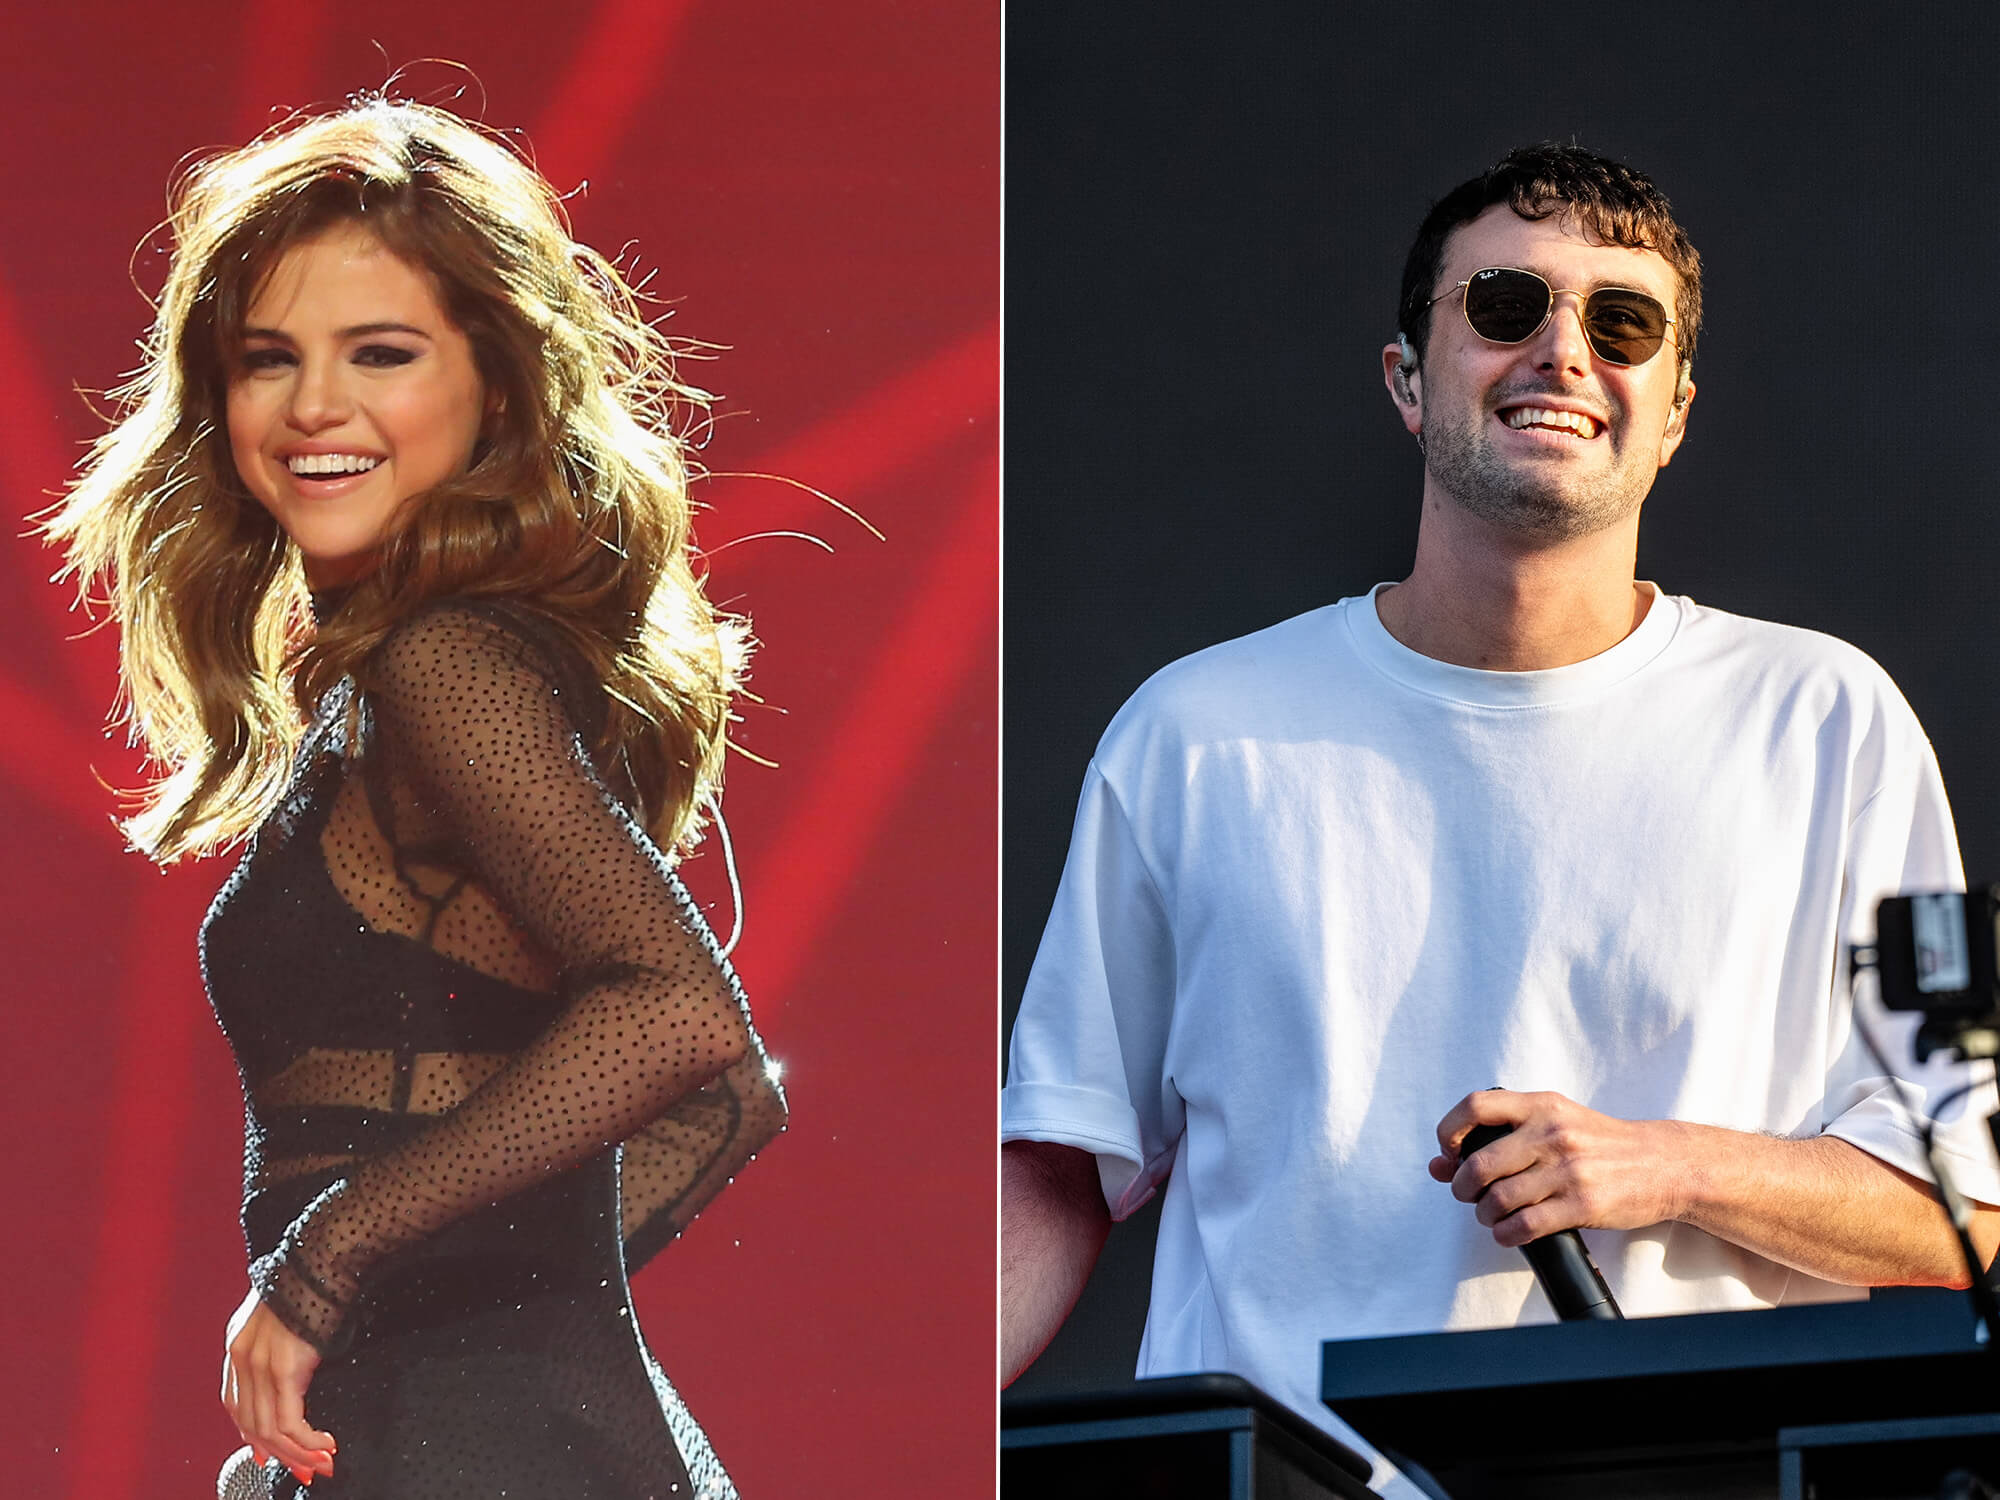 Selena Gomez smiling on stage in a sparkly black outfit (L). Fred again with a microphone in hand, wearing sunglasses and smiling (R).